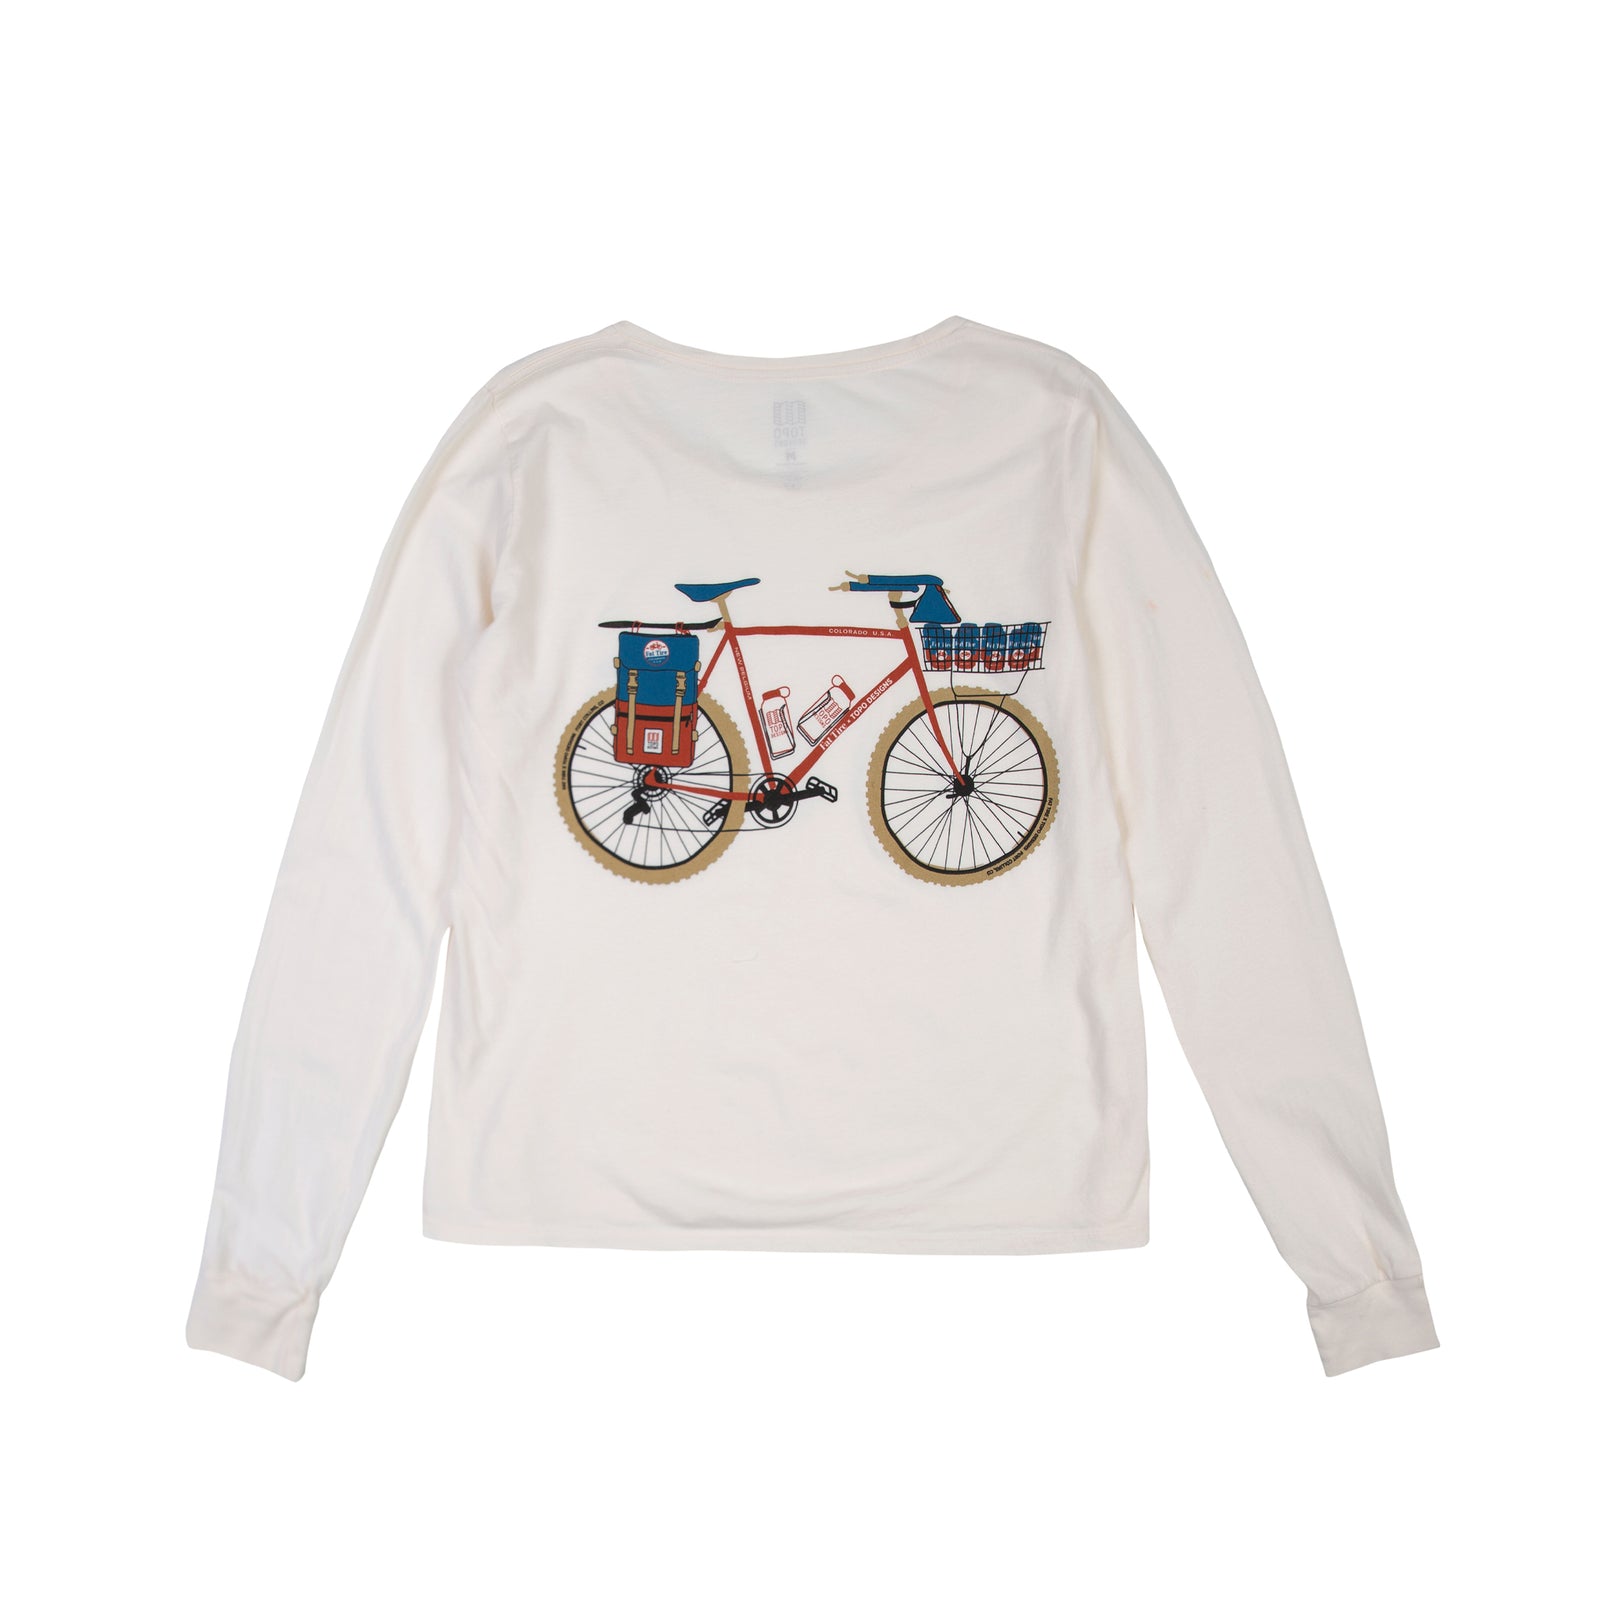 Back bike graphic on Topo Designs x New Belgium Fat Tire Women's Long Sleeve T-Shirt in Natural white.